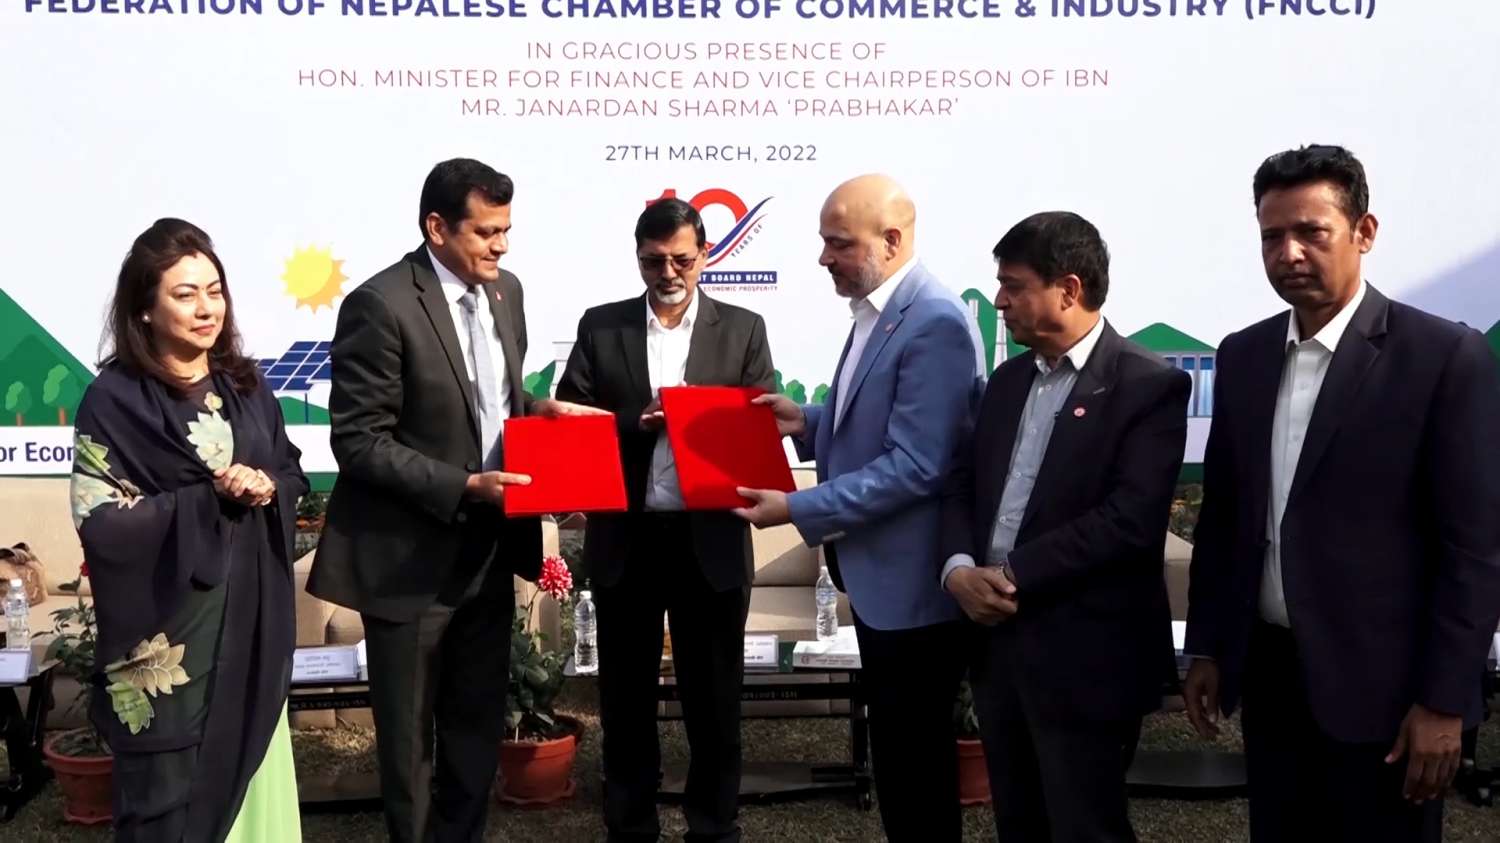 FNCCI signs Pact with Investment Board to Promote Investment